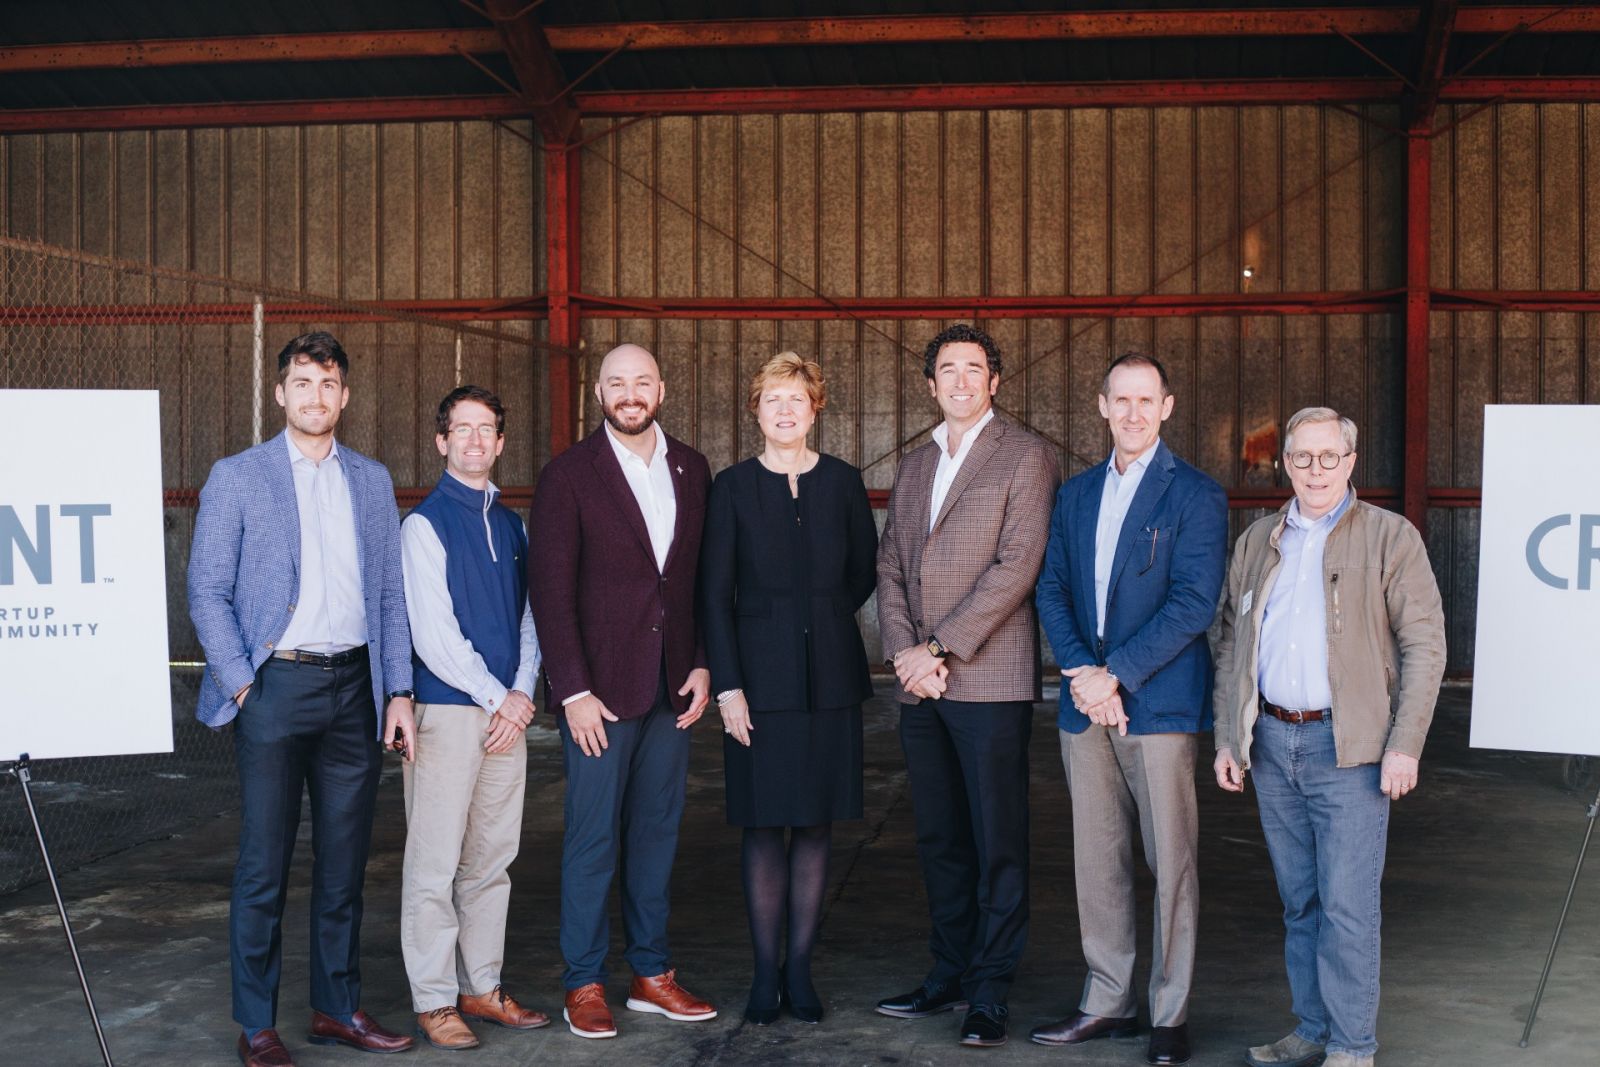  Fred Dilworth, Paul Clark, Anthony Herrera, Elizabeth Davis, Jim Burns, Sean Hartness and Peter Marsh gather to announce plans to create a space that will cultivate innovation and entrepreneurship. (Photo/Provided)